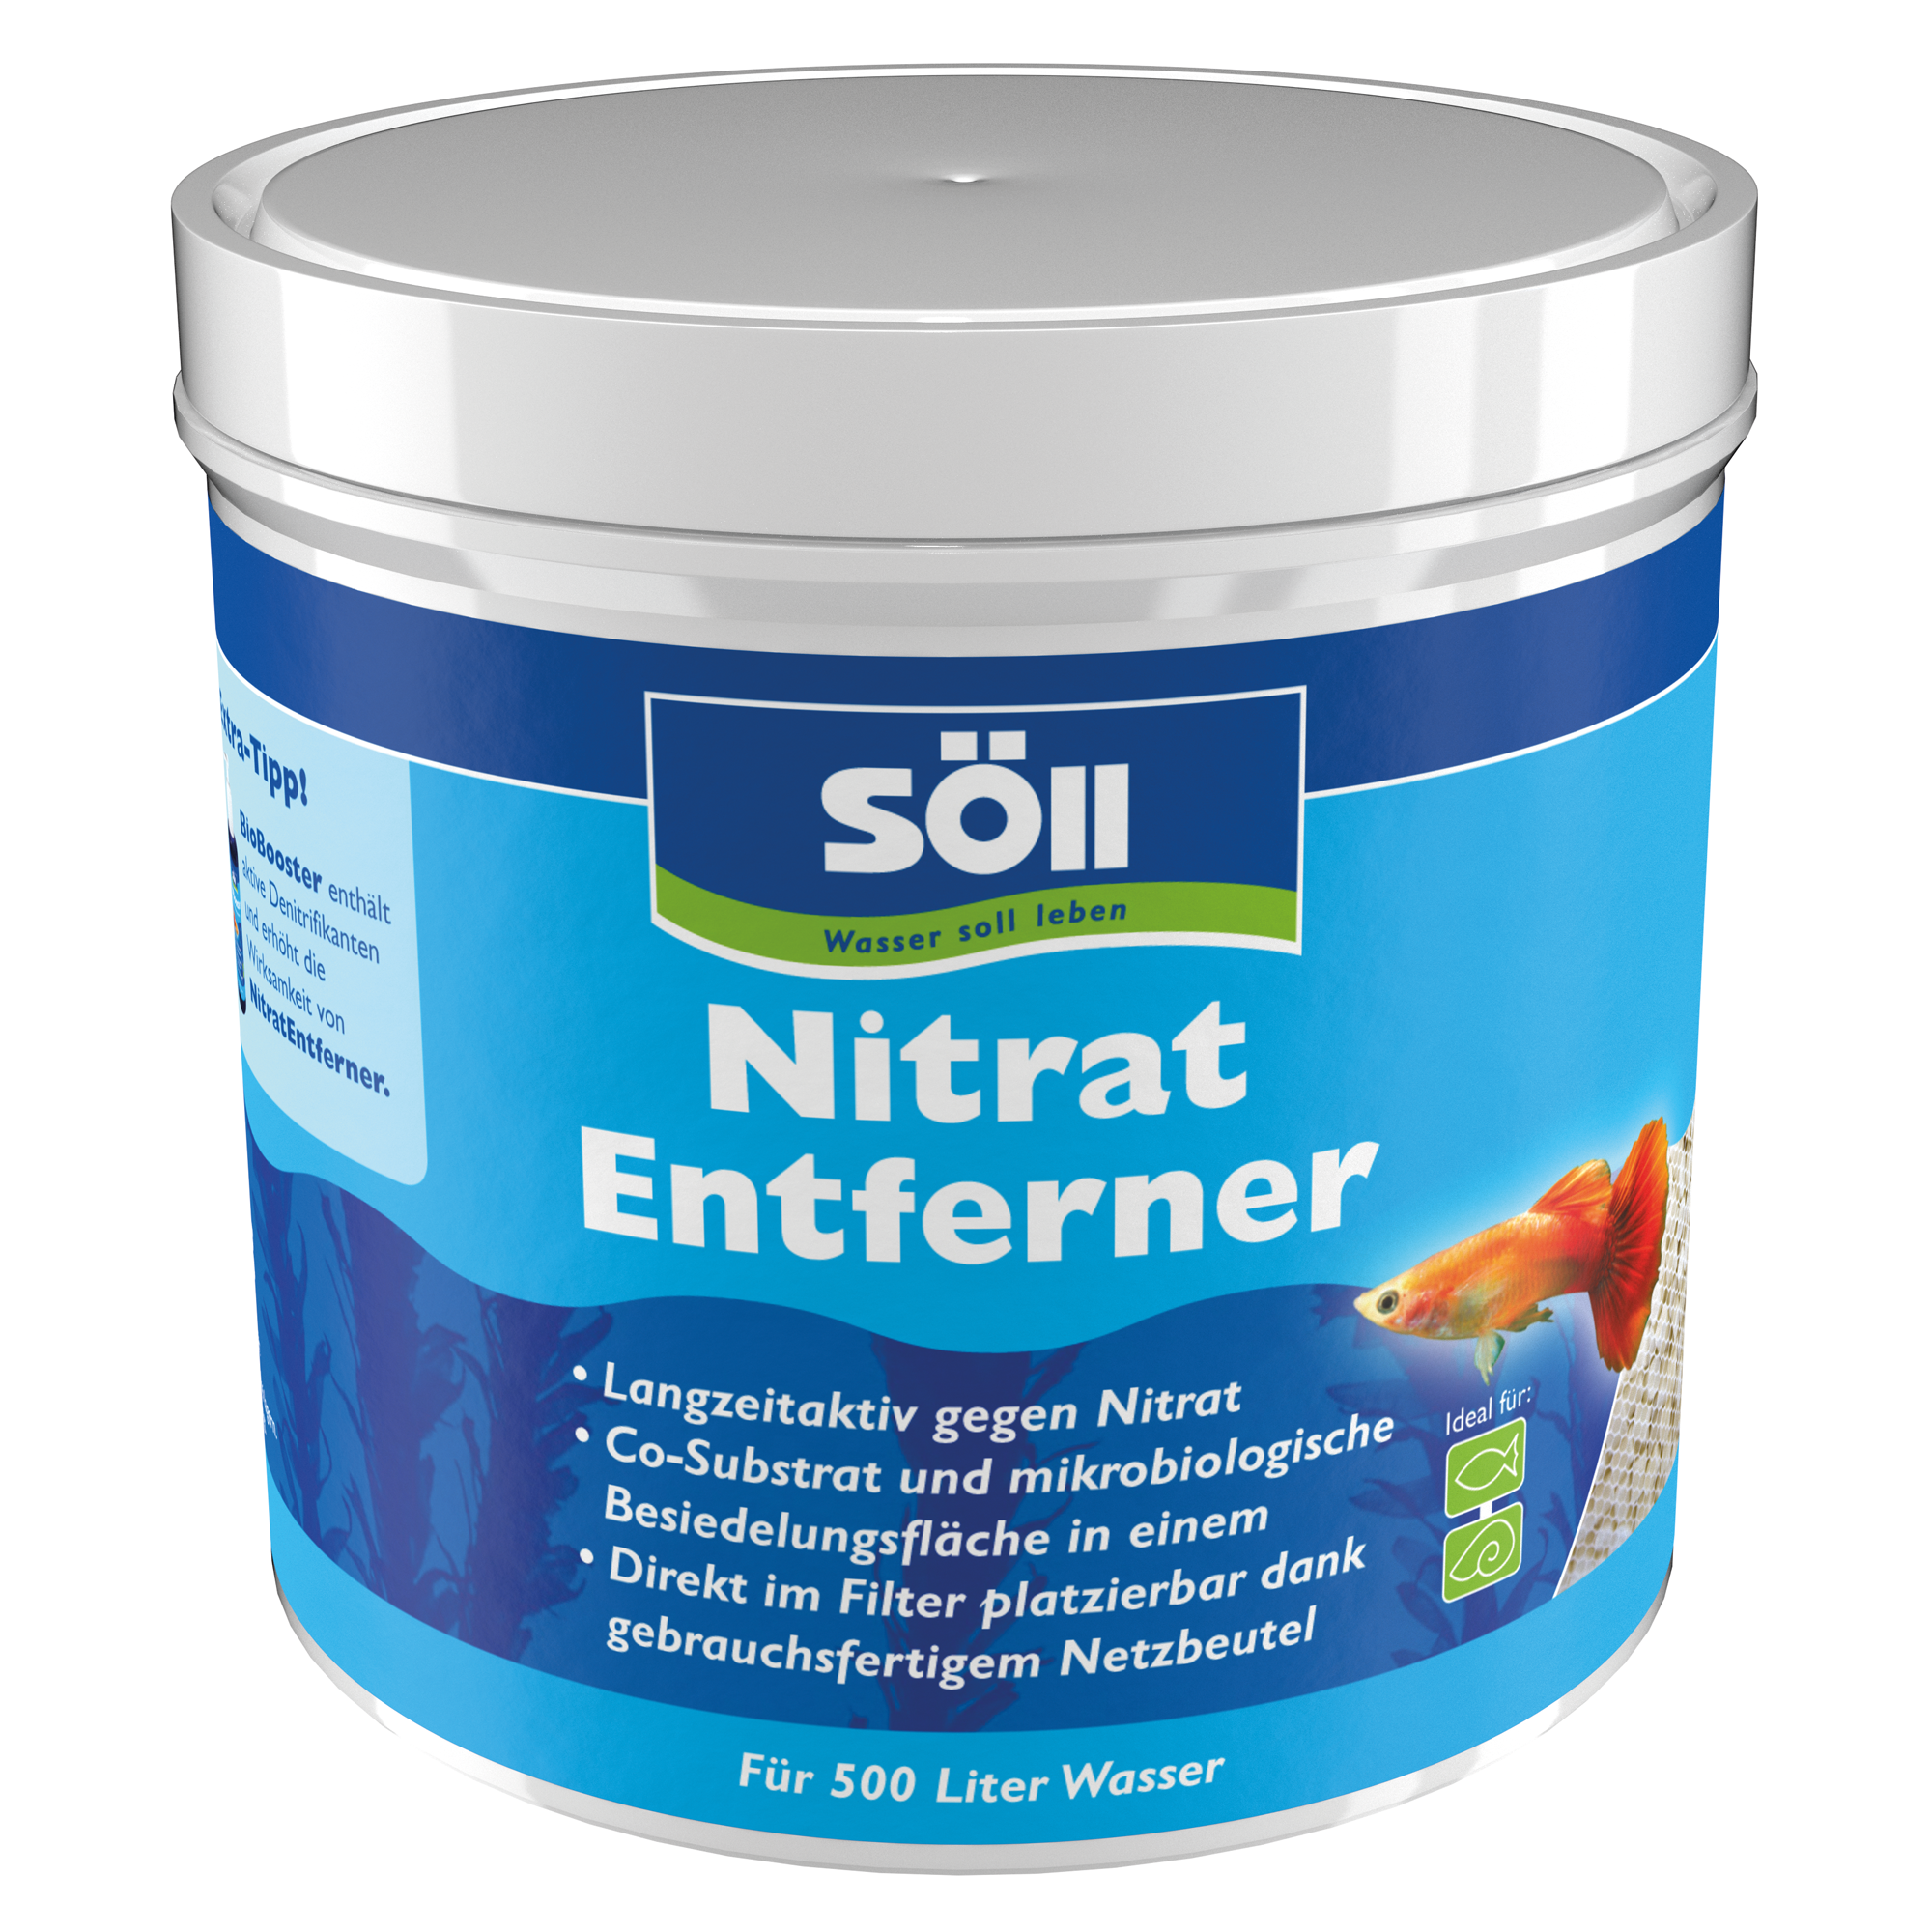 NitratEntferner 300 g + product picture